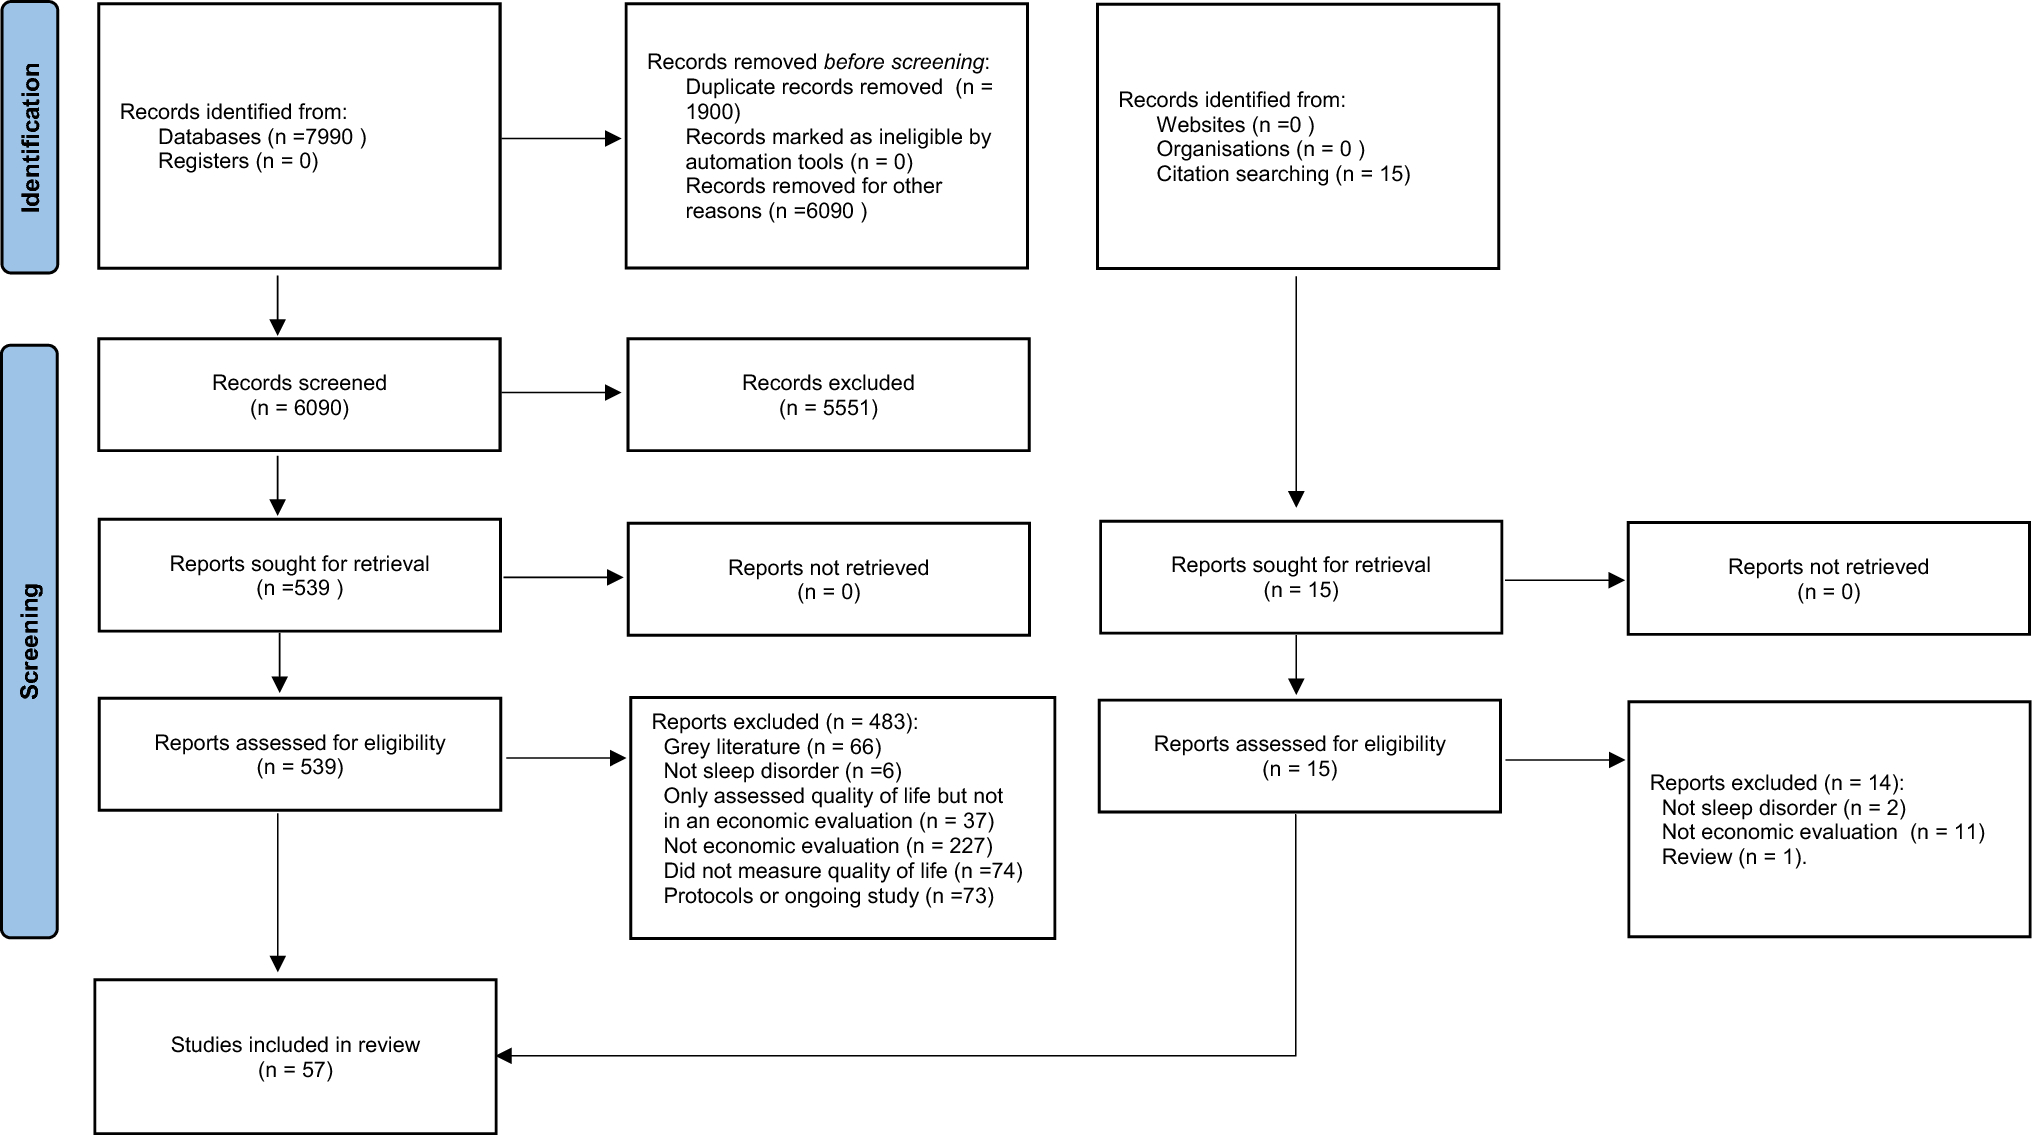 Content Comparison of Quality-of-Life Instruments Used in Economic Evaluations of Sleep Disorder Interventions: A Systematic Review